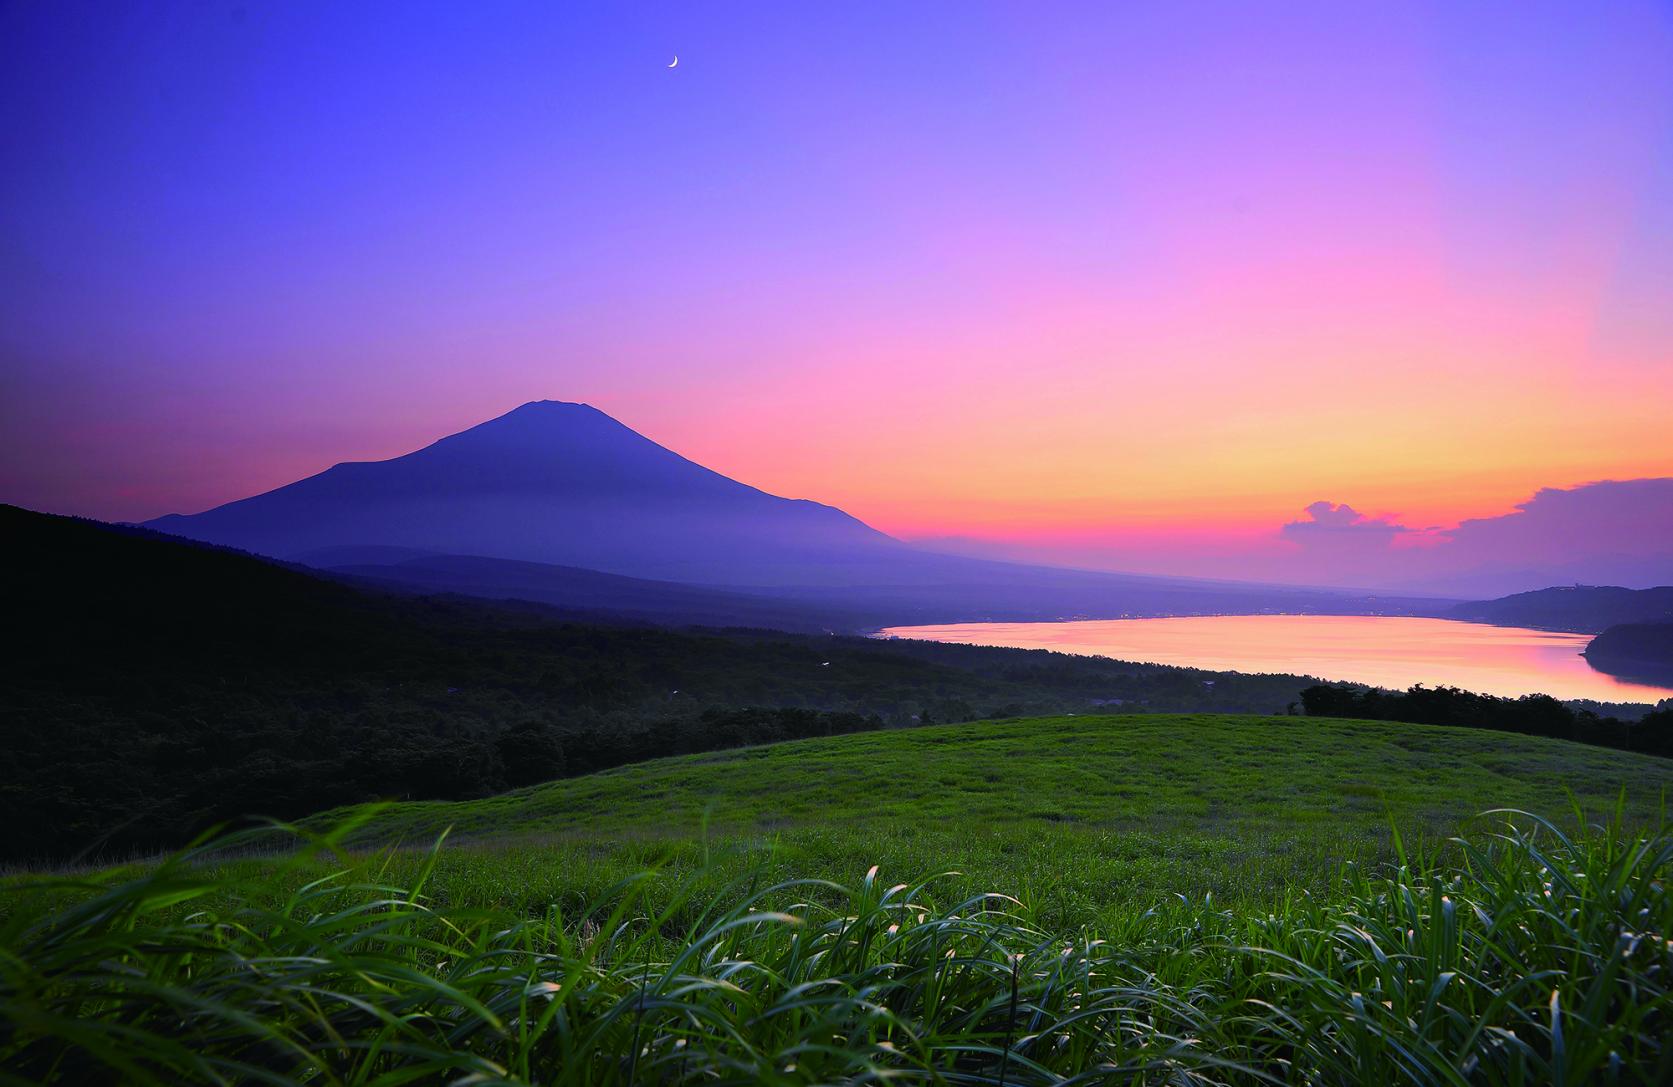 We will Take You to the Best Viewing Points to Photograph Mt. Fuji.-2